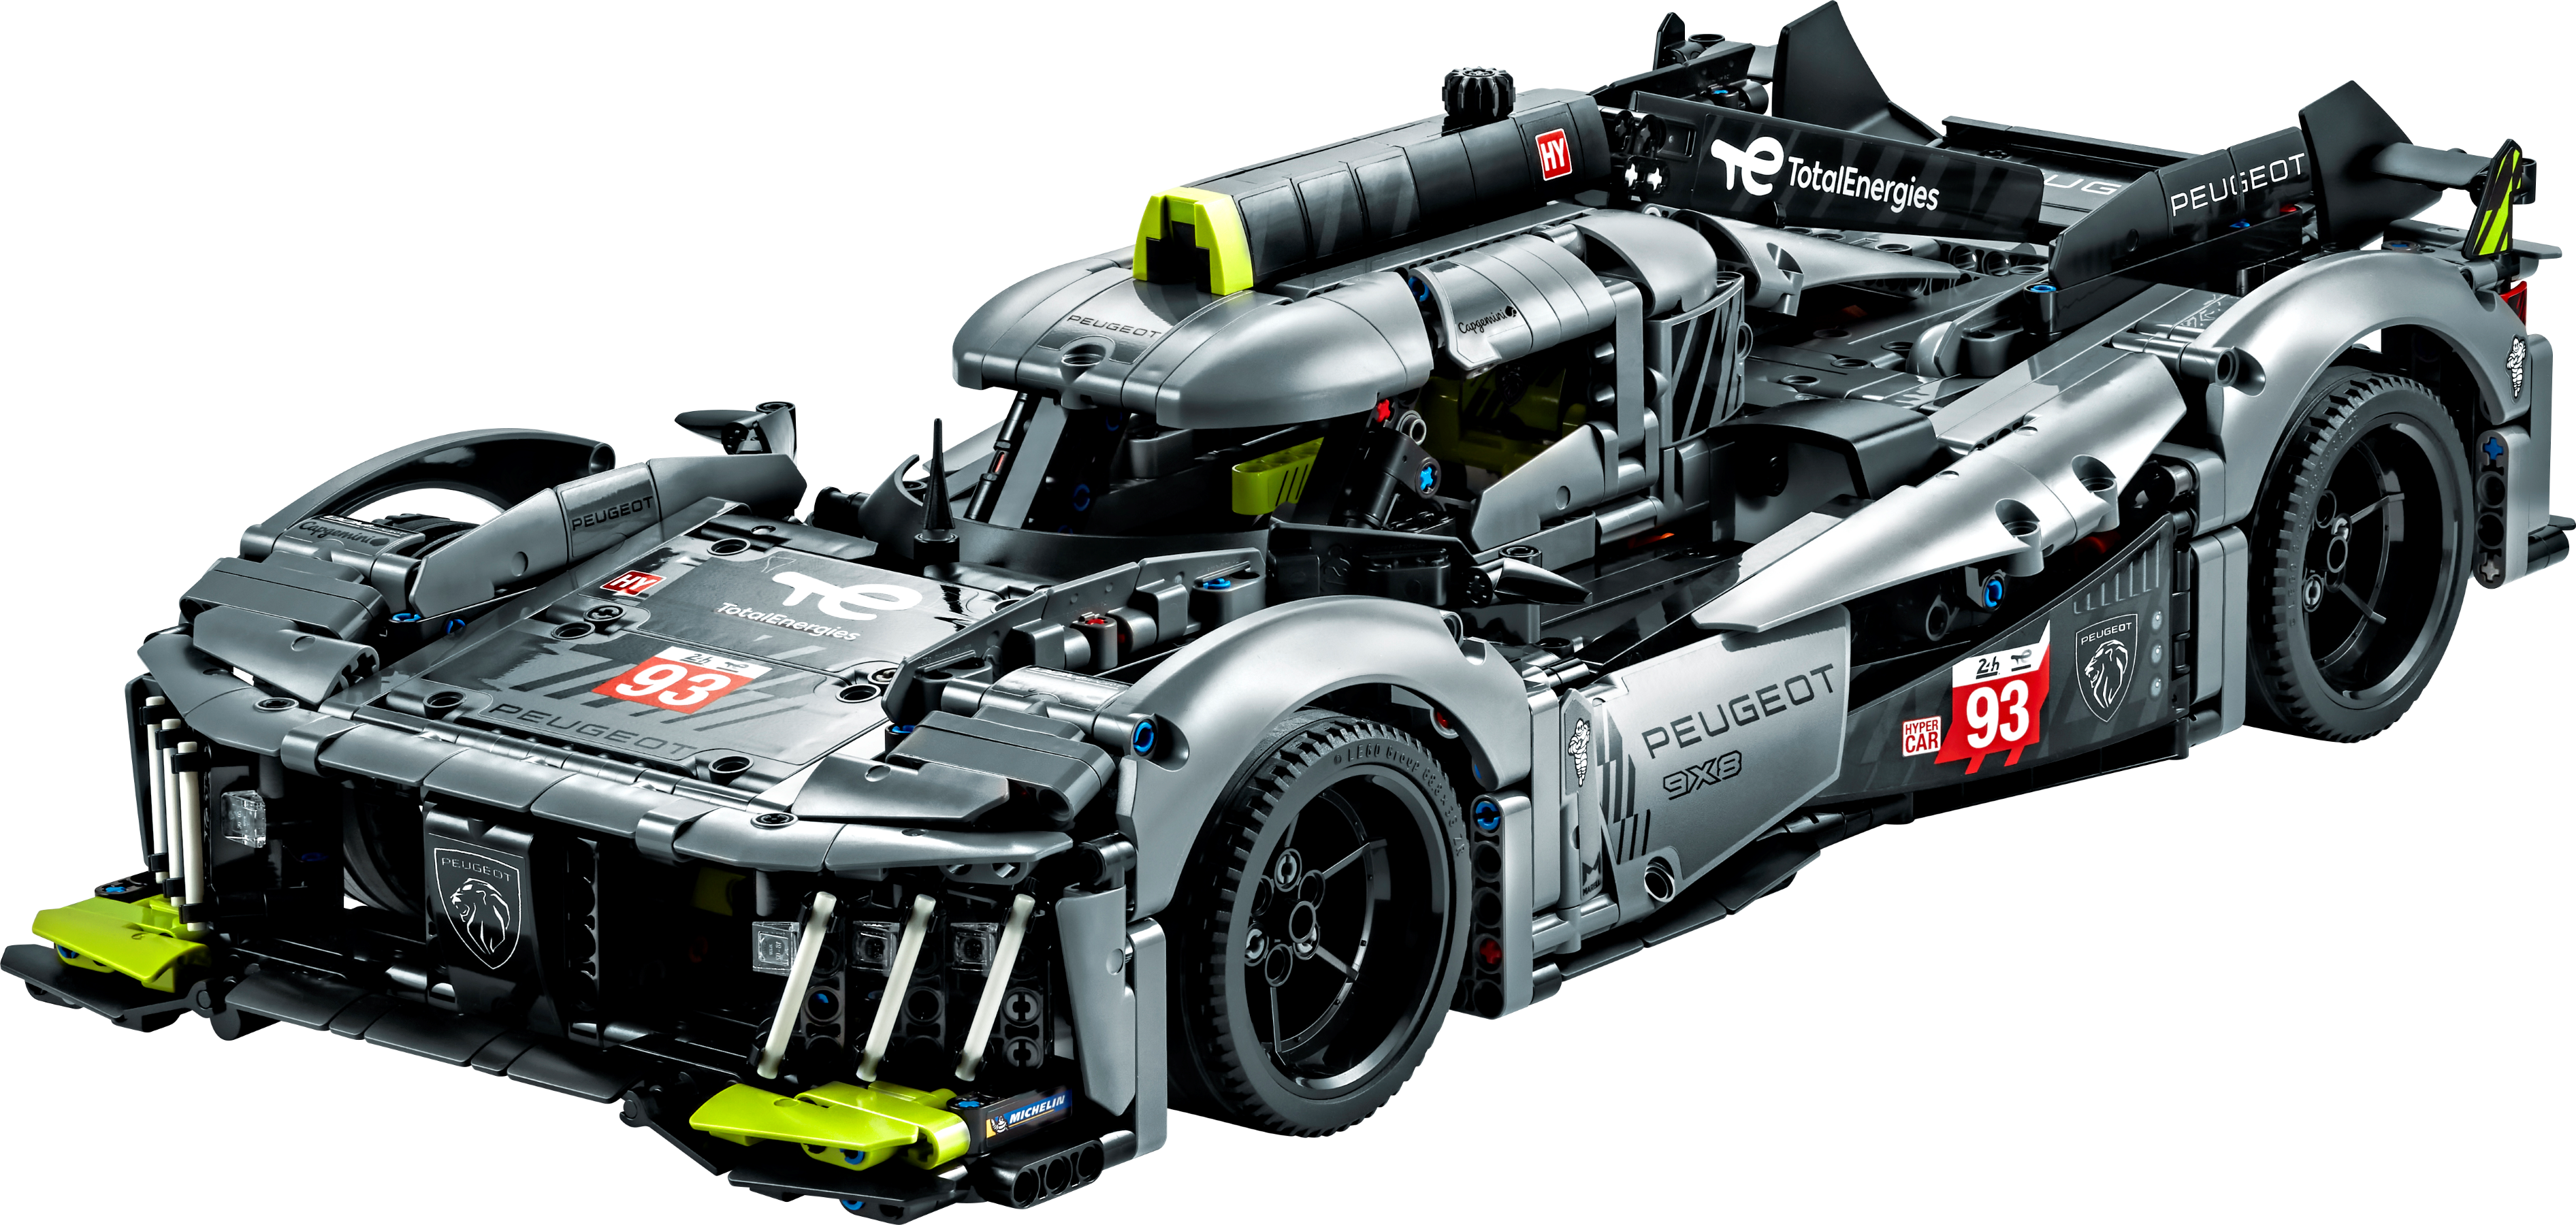 The 10 best Lego car sets in australia